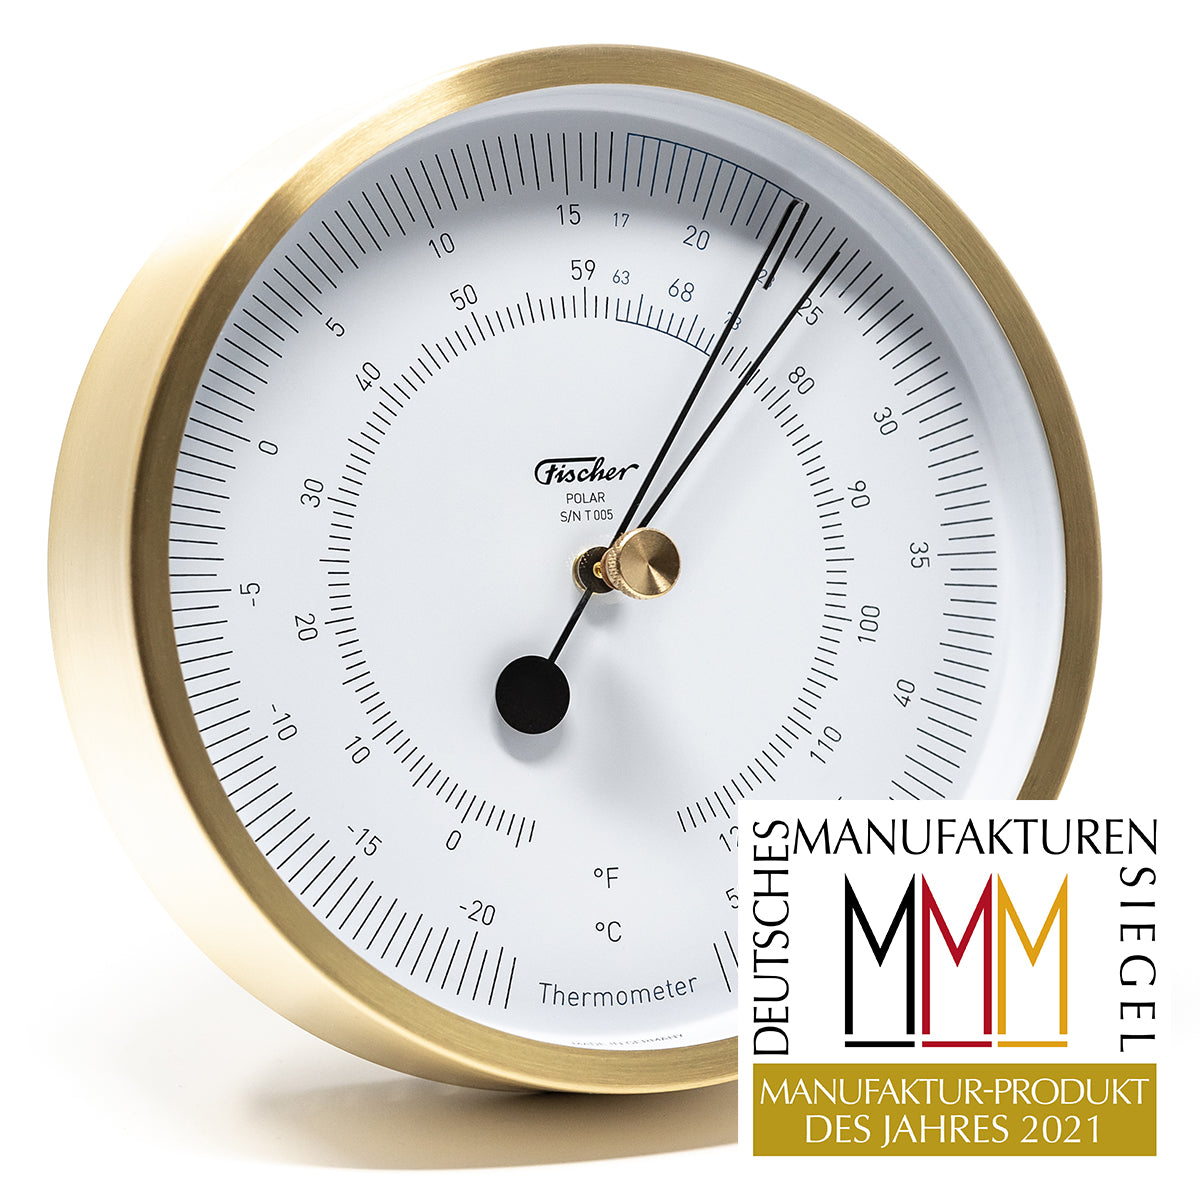 POLAR Instruments - Thermometer Brushed Brass